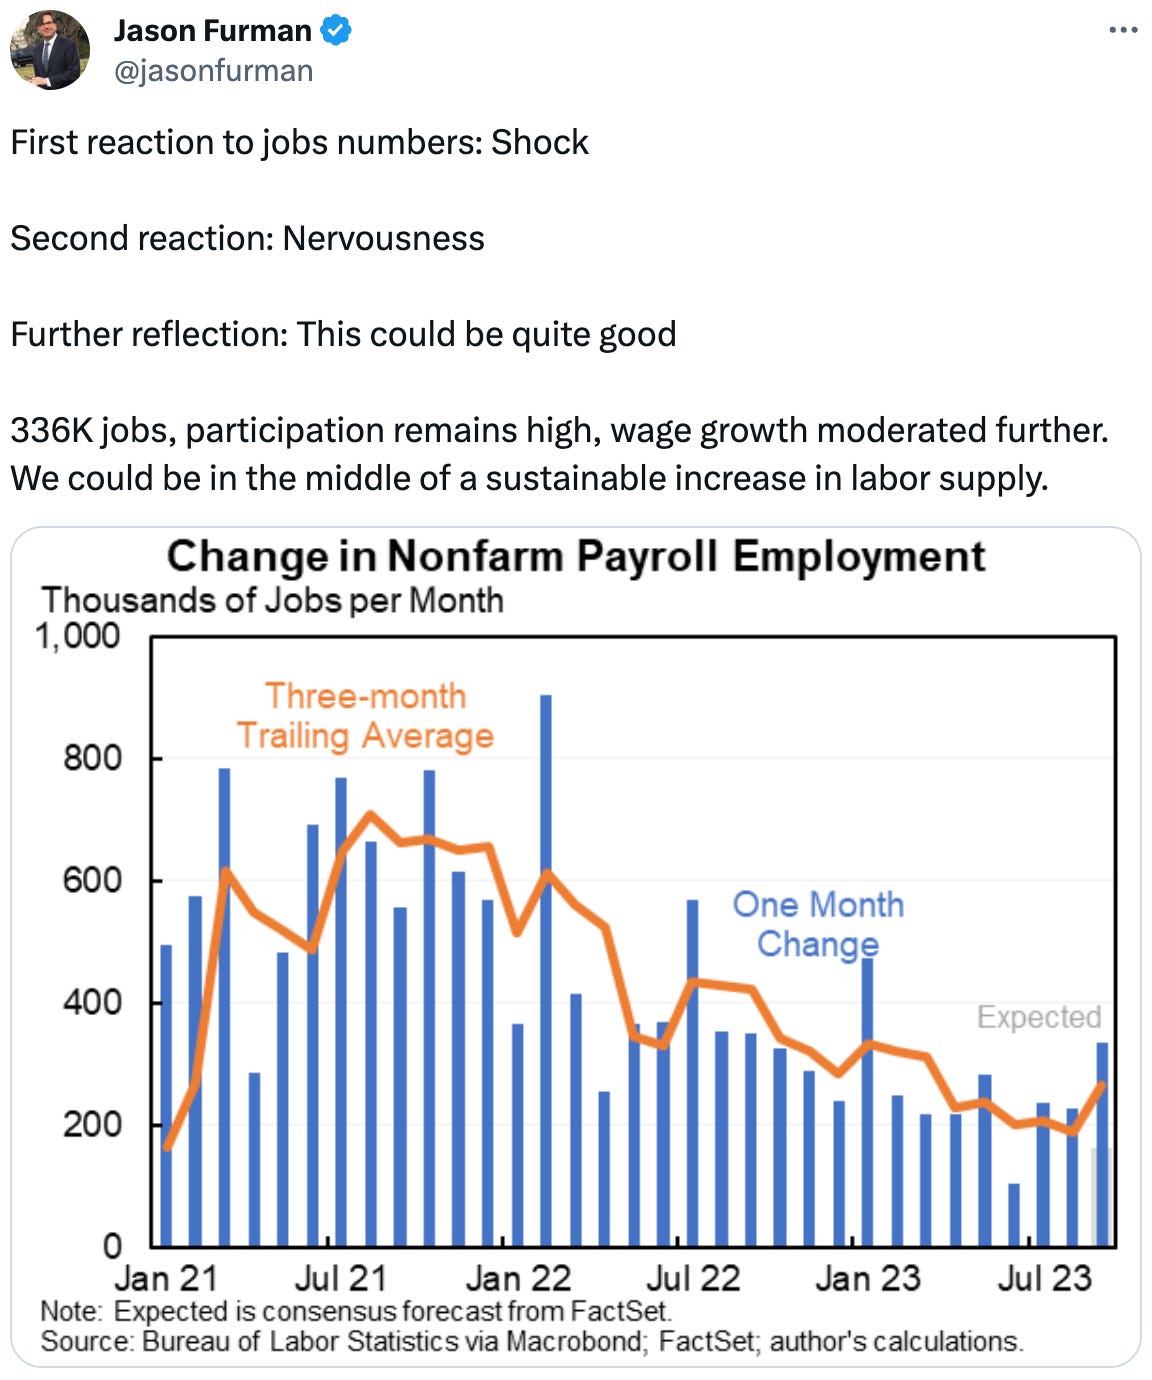  See new posts Conversation Jason Furman @jasonfurman First reaction to jobs numbers: Shock  Second reaction: Nervousness  Further reflection: This could be quite good  336K jobs, participation remains high, wage growth moderated further. We could be in the middle of a sustainable increase in labor supply.